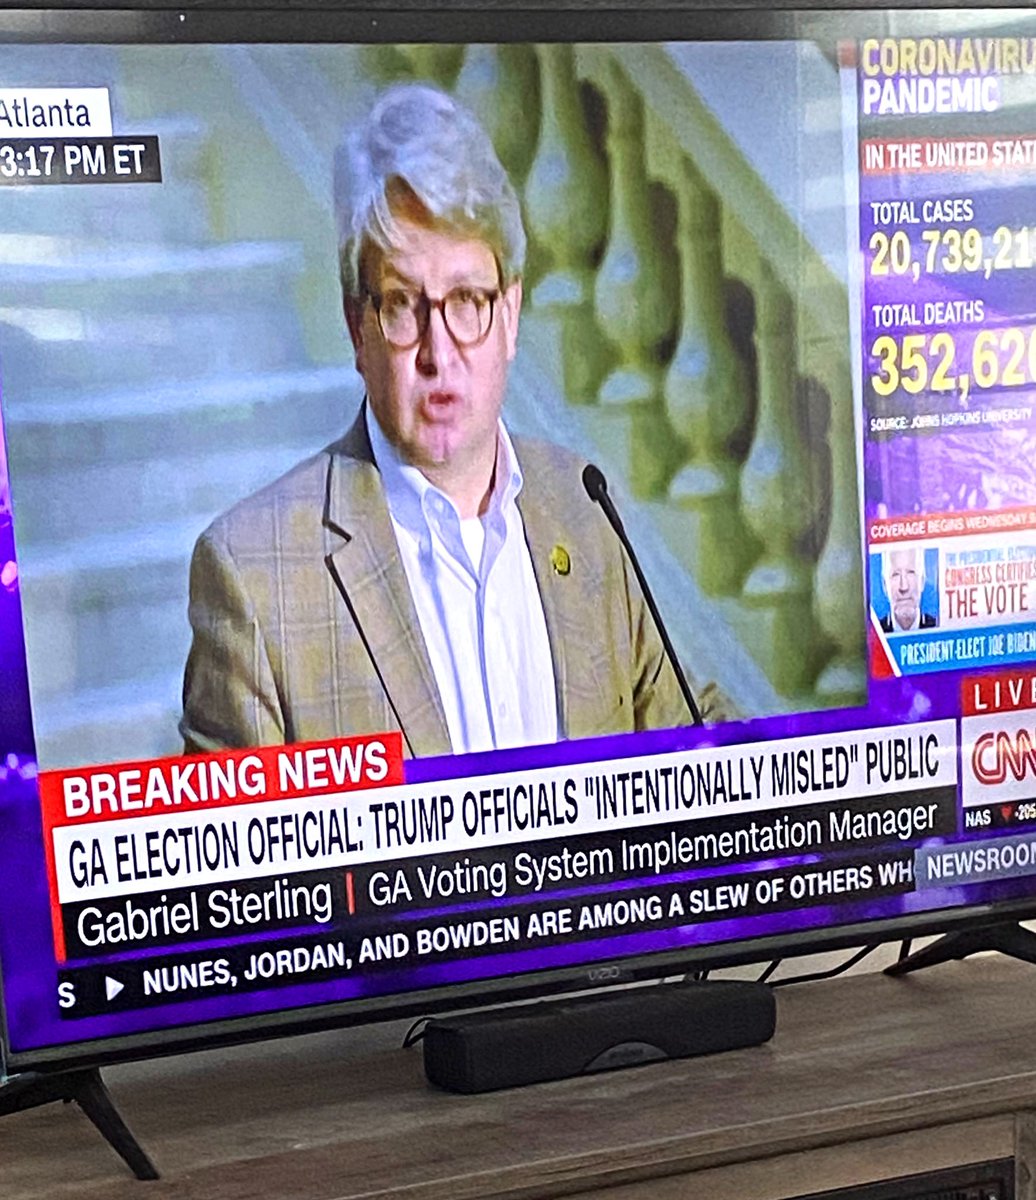 @GabrielSterling @annew045 @Mark_Lathim @PatrickByrne @GabrielSterling being broadcast speaking live right now in #Georgia. 

@GabrielSterling is absolutely slaying the @GOP dragon of lies by simply wielding his sword of truth.

@GabrielSterling is my hero today.
@GabrielSterling is my #MCM. @CNN @cnnbrk